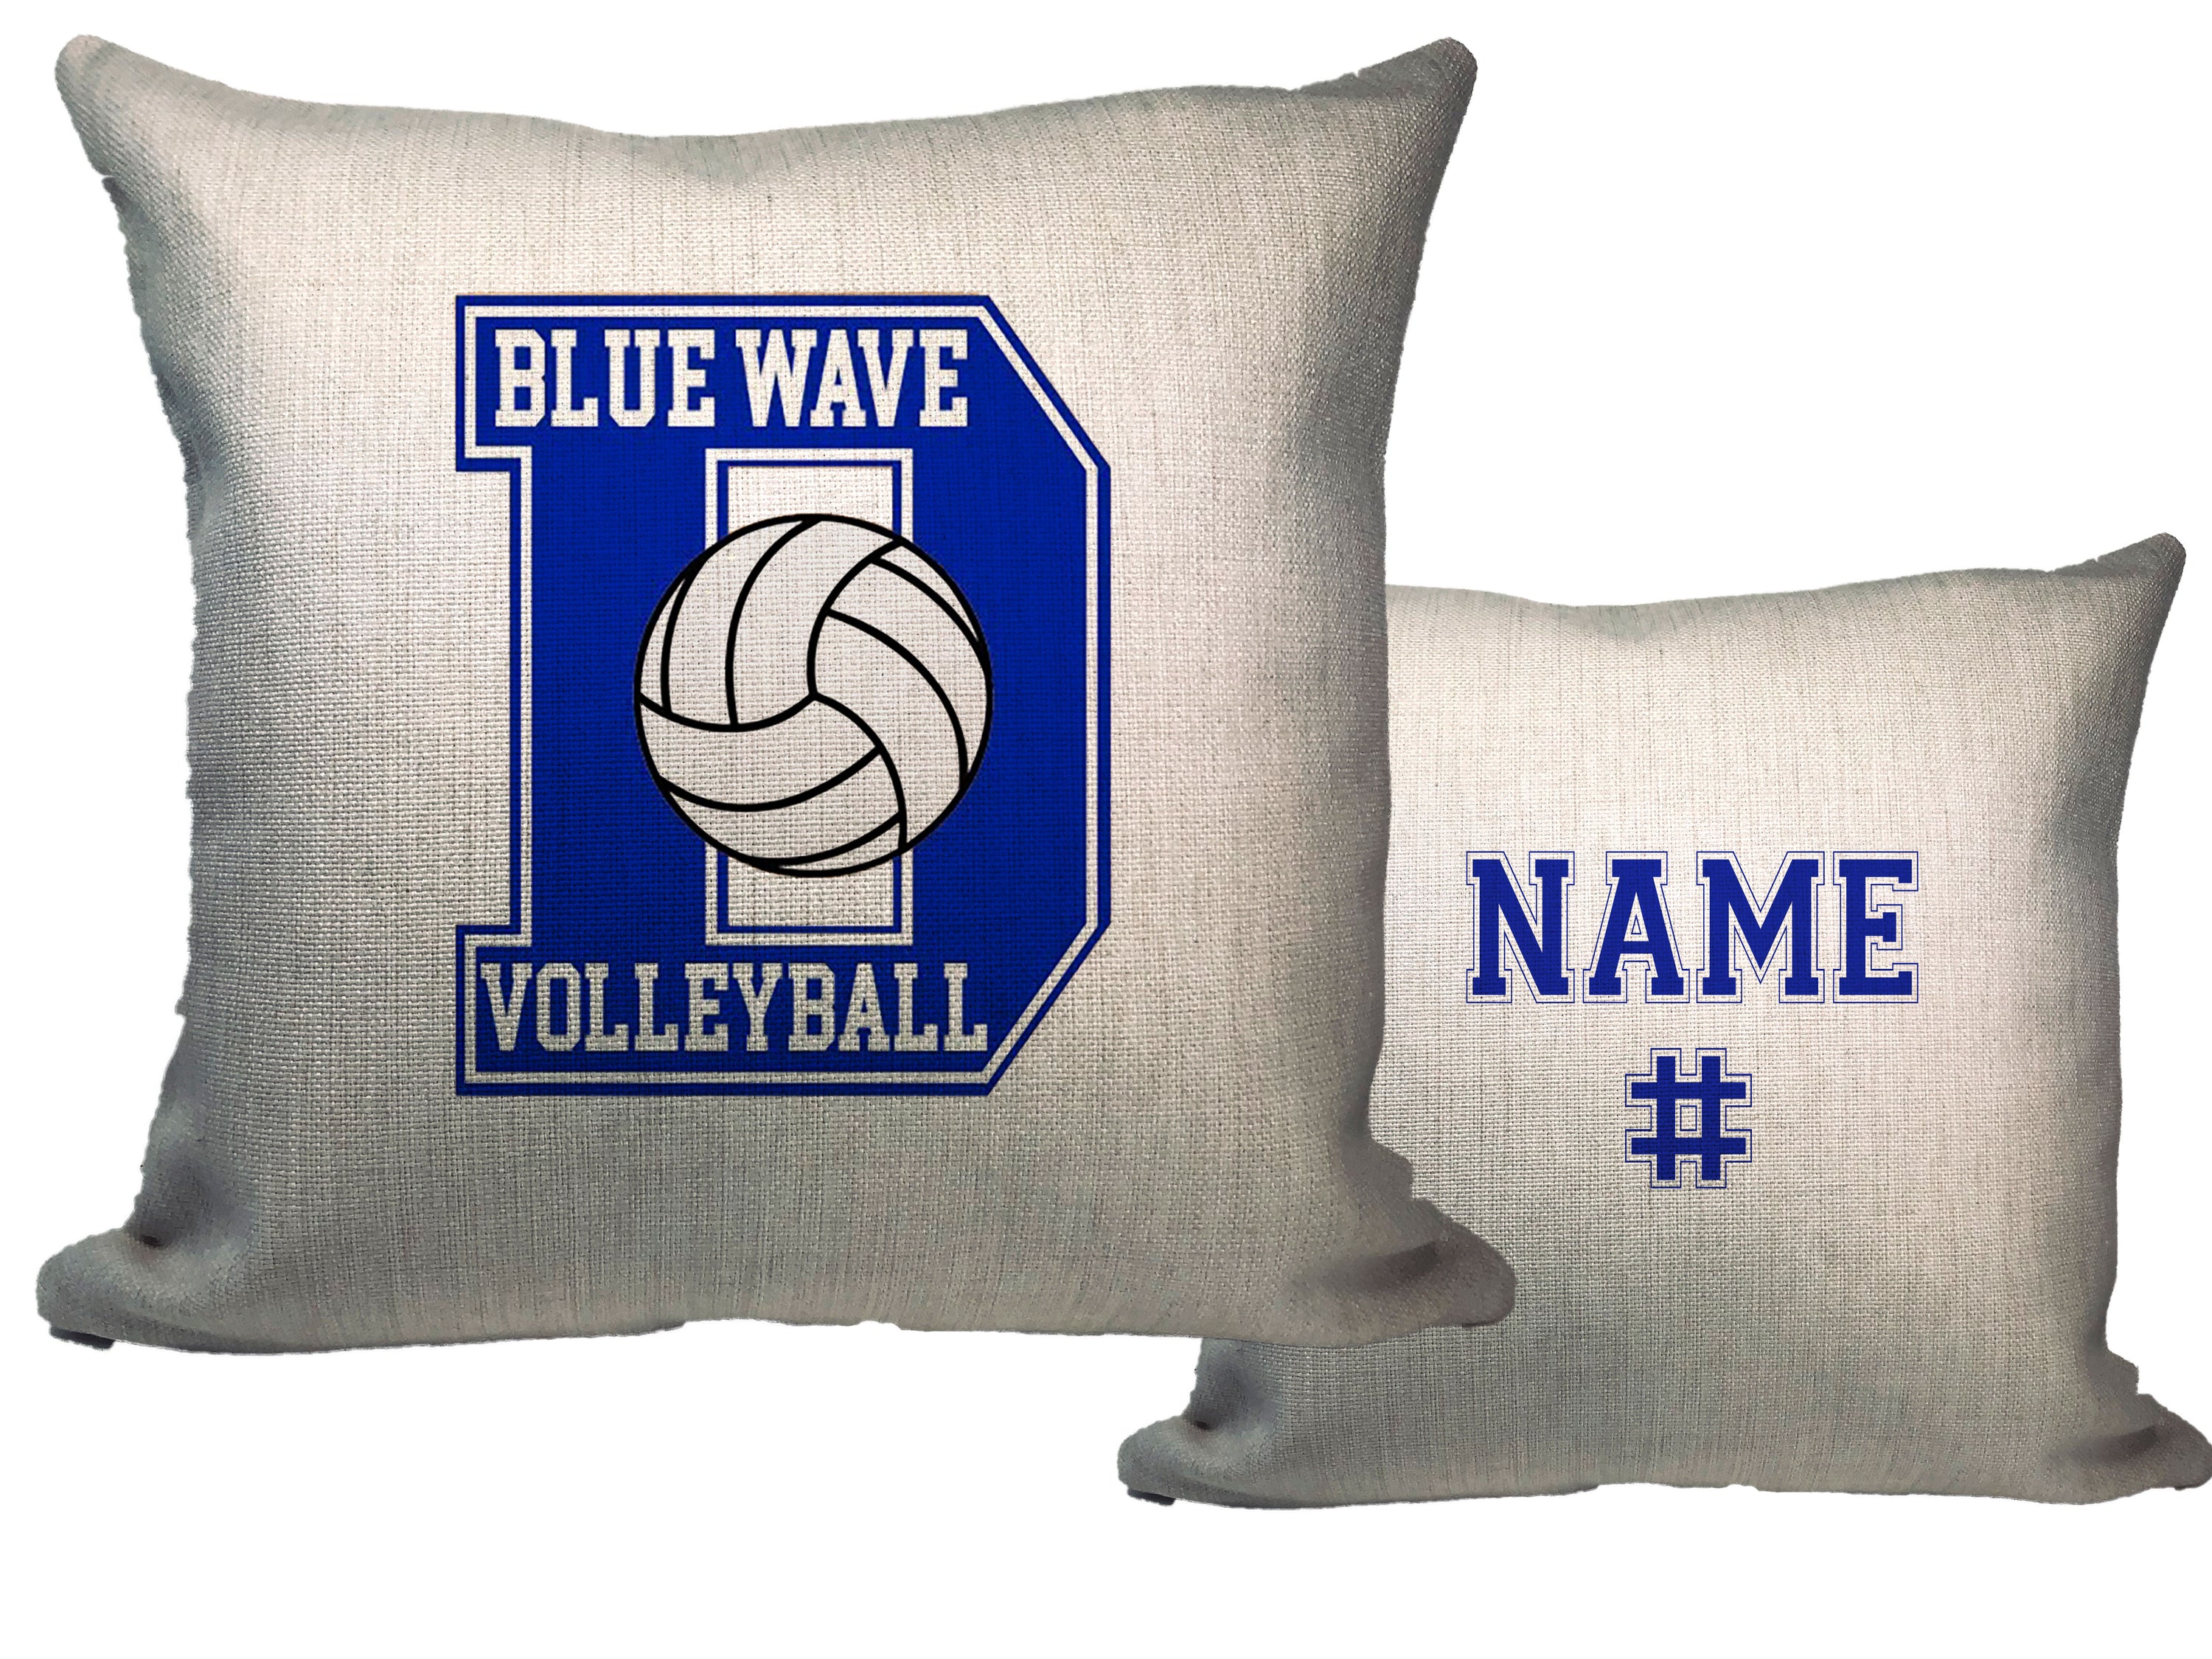 Blue Wave Volleyball Throw Pillow - Name